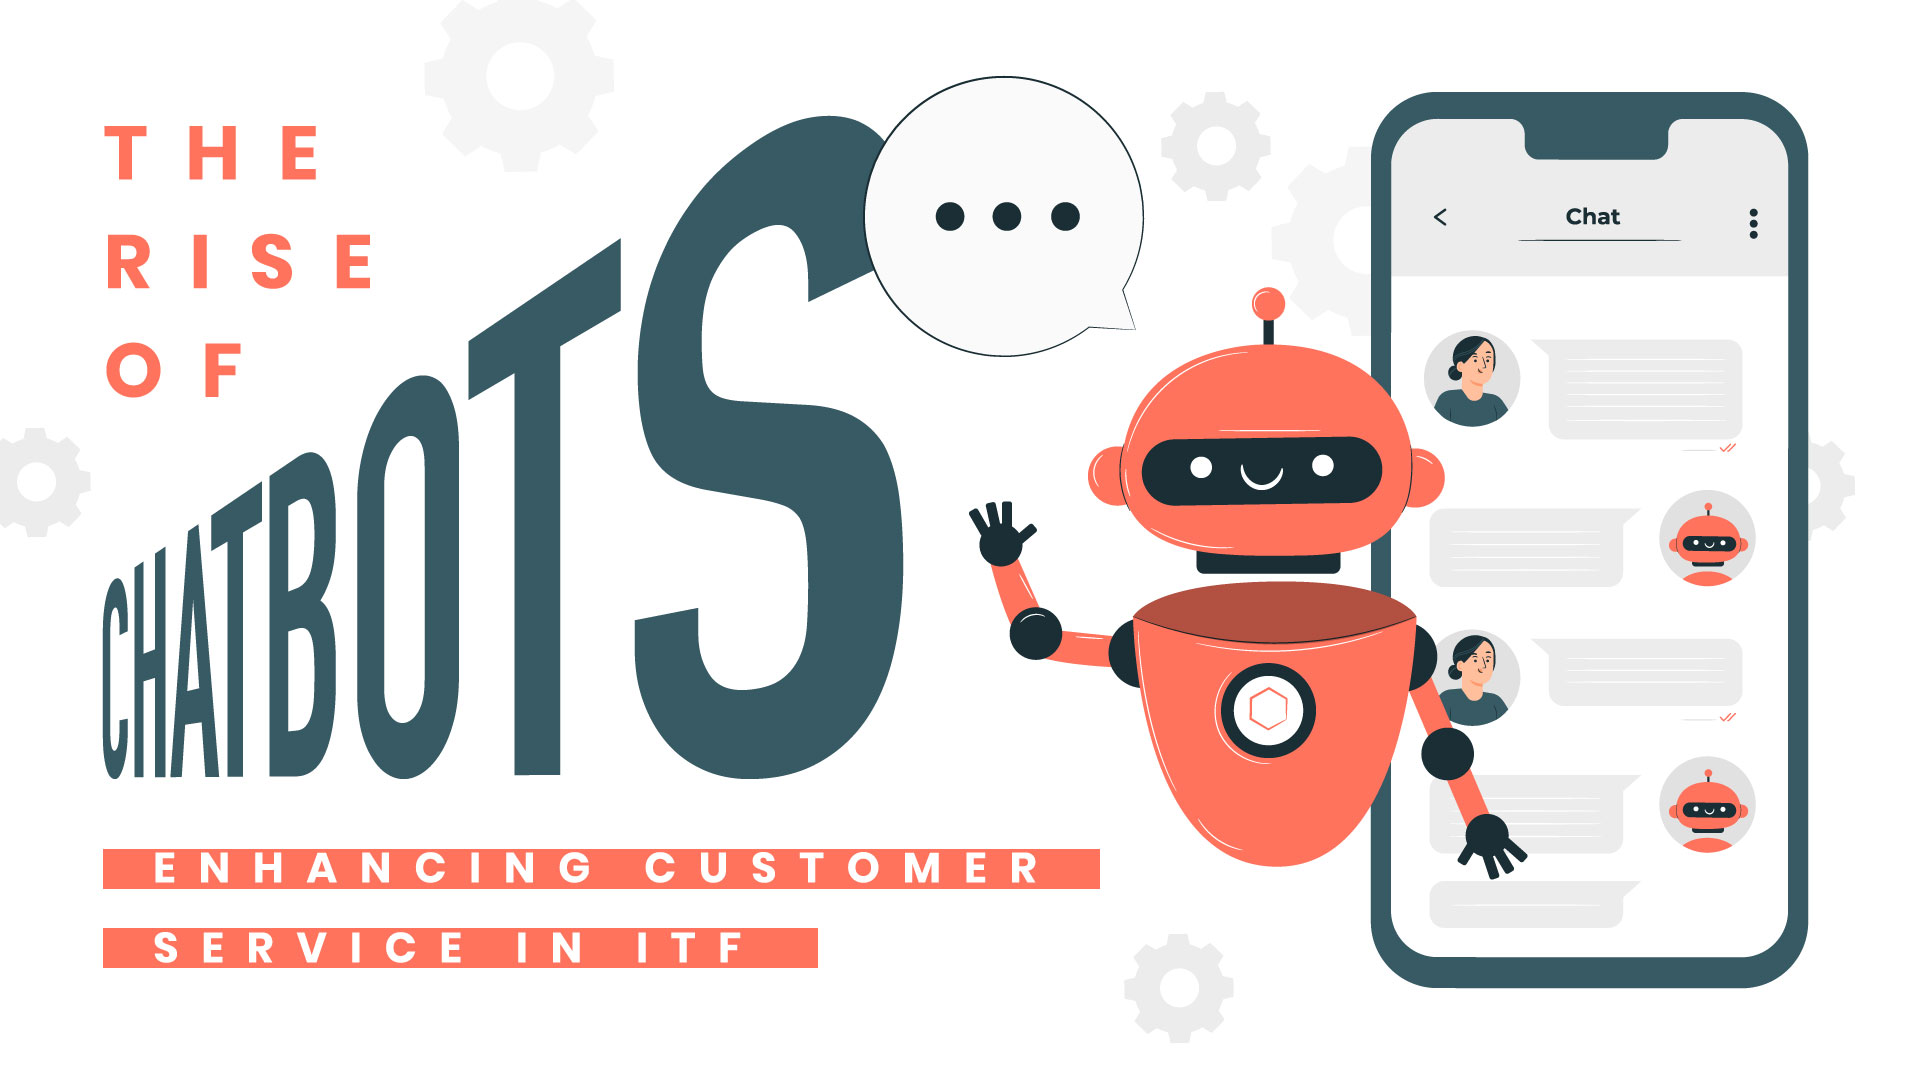 The Rise of Chatbots: Enhancing Customer Service in IT